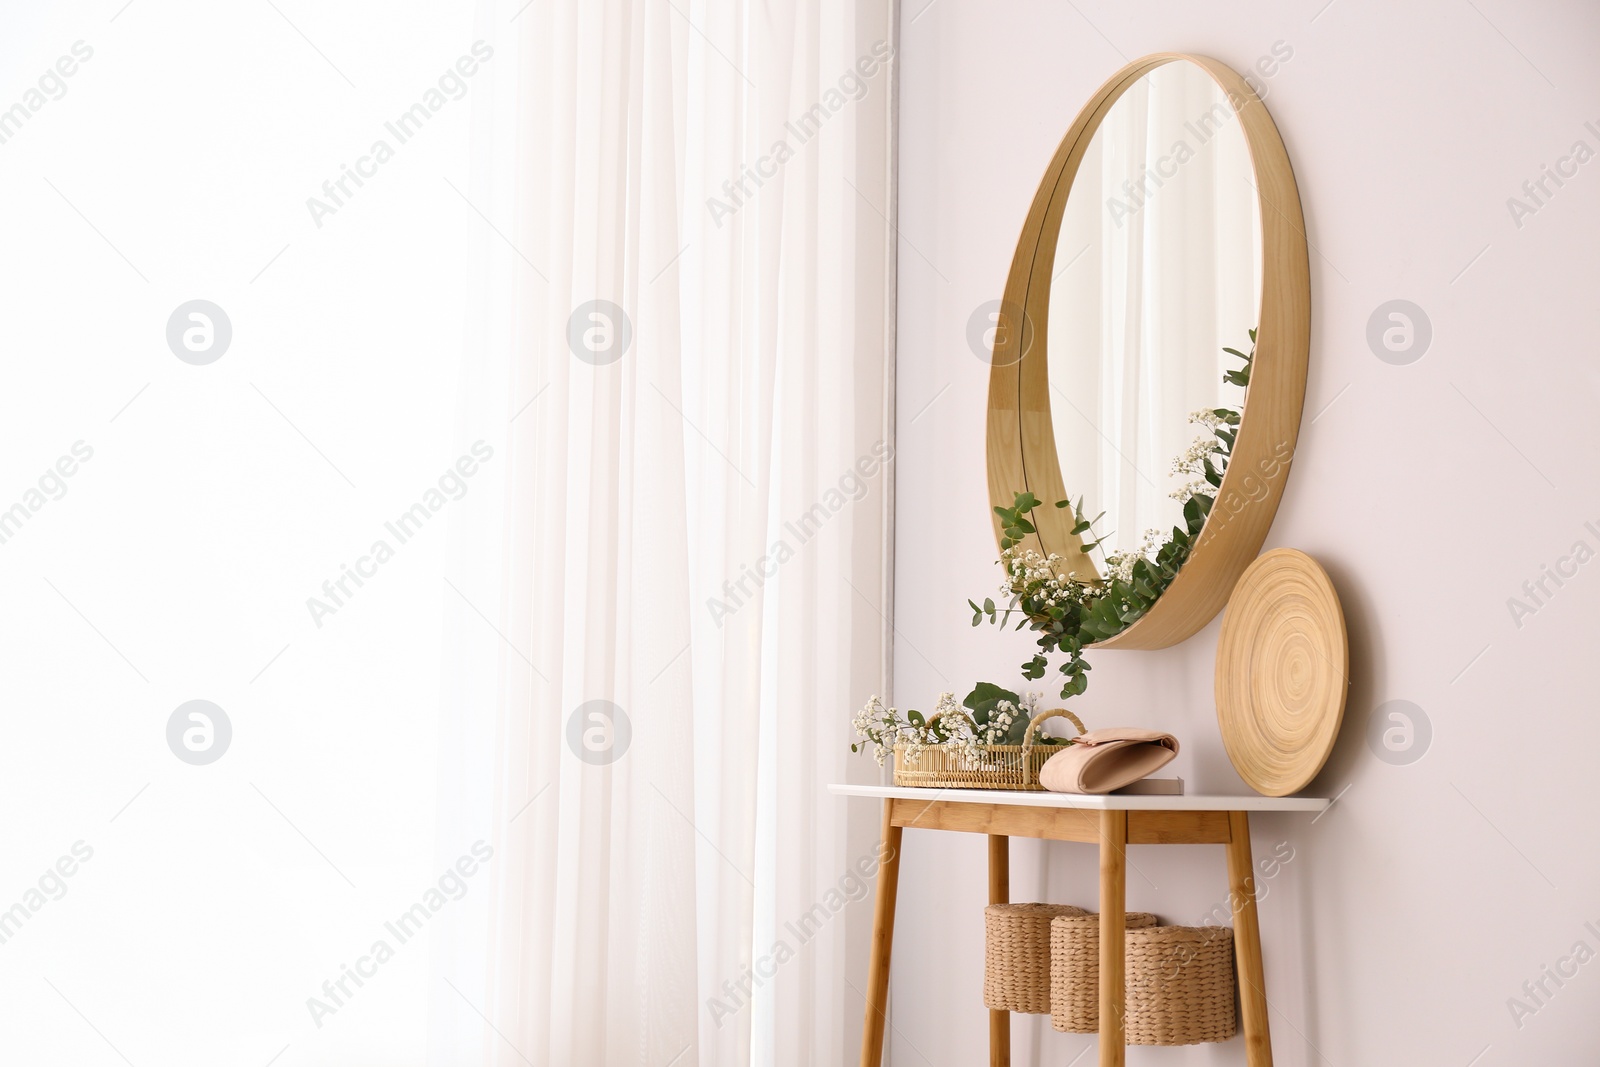 Photo of Round mirror and table with accessories near white wall. Modern interior design